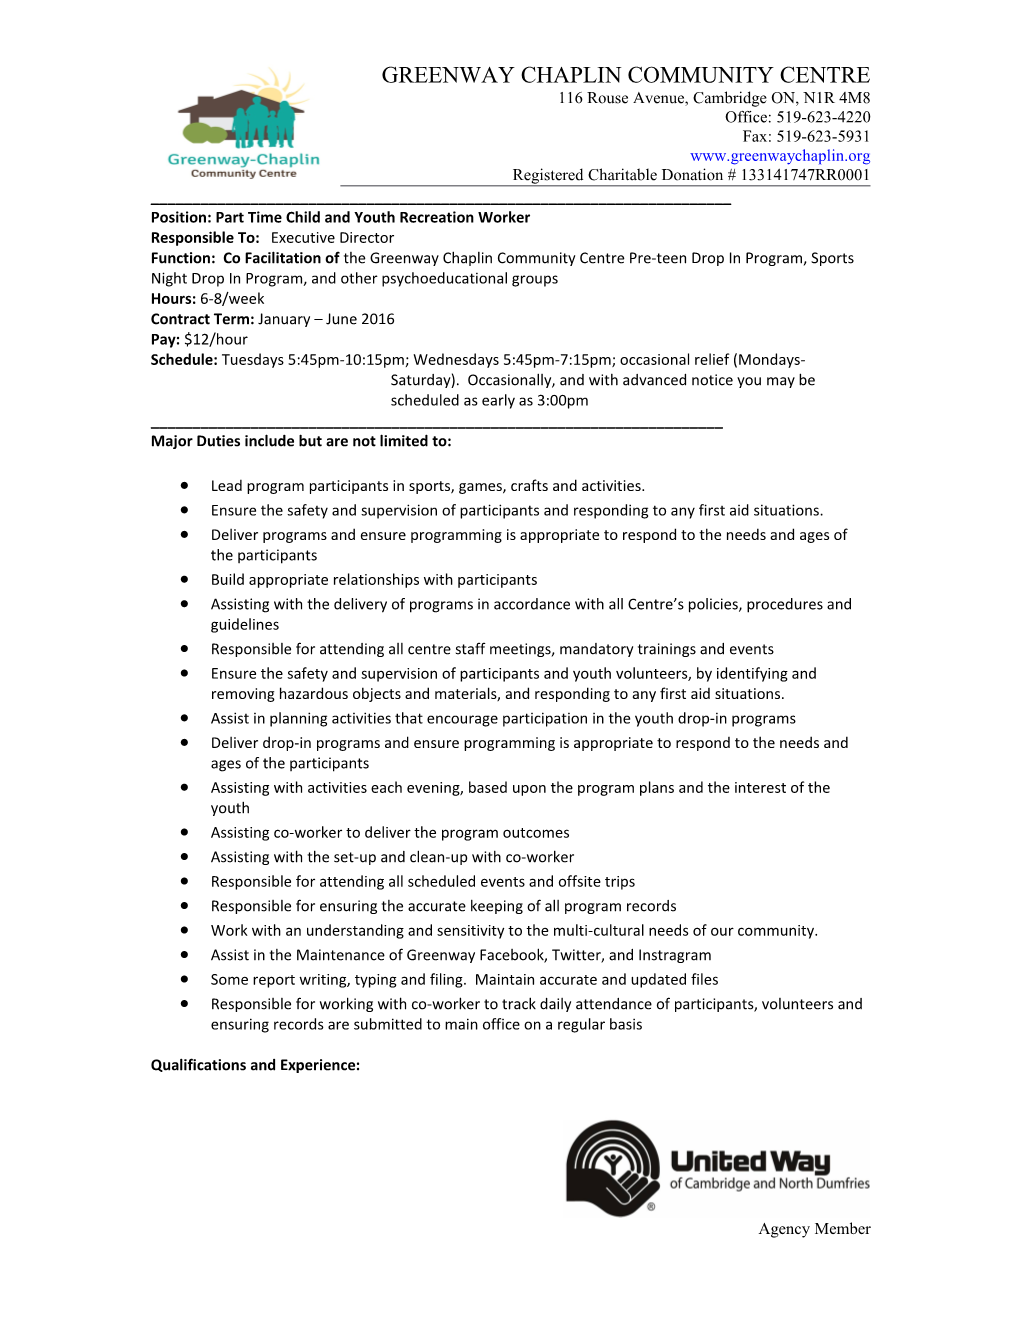 Position: Part Time Child and Youth Recreation Worker